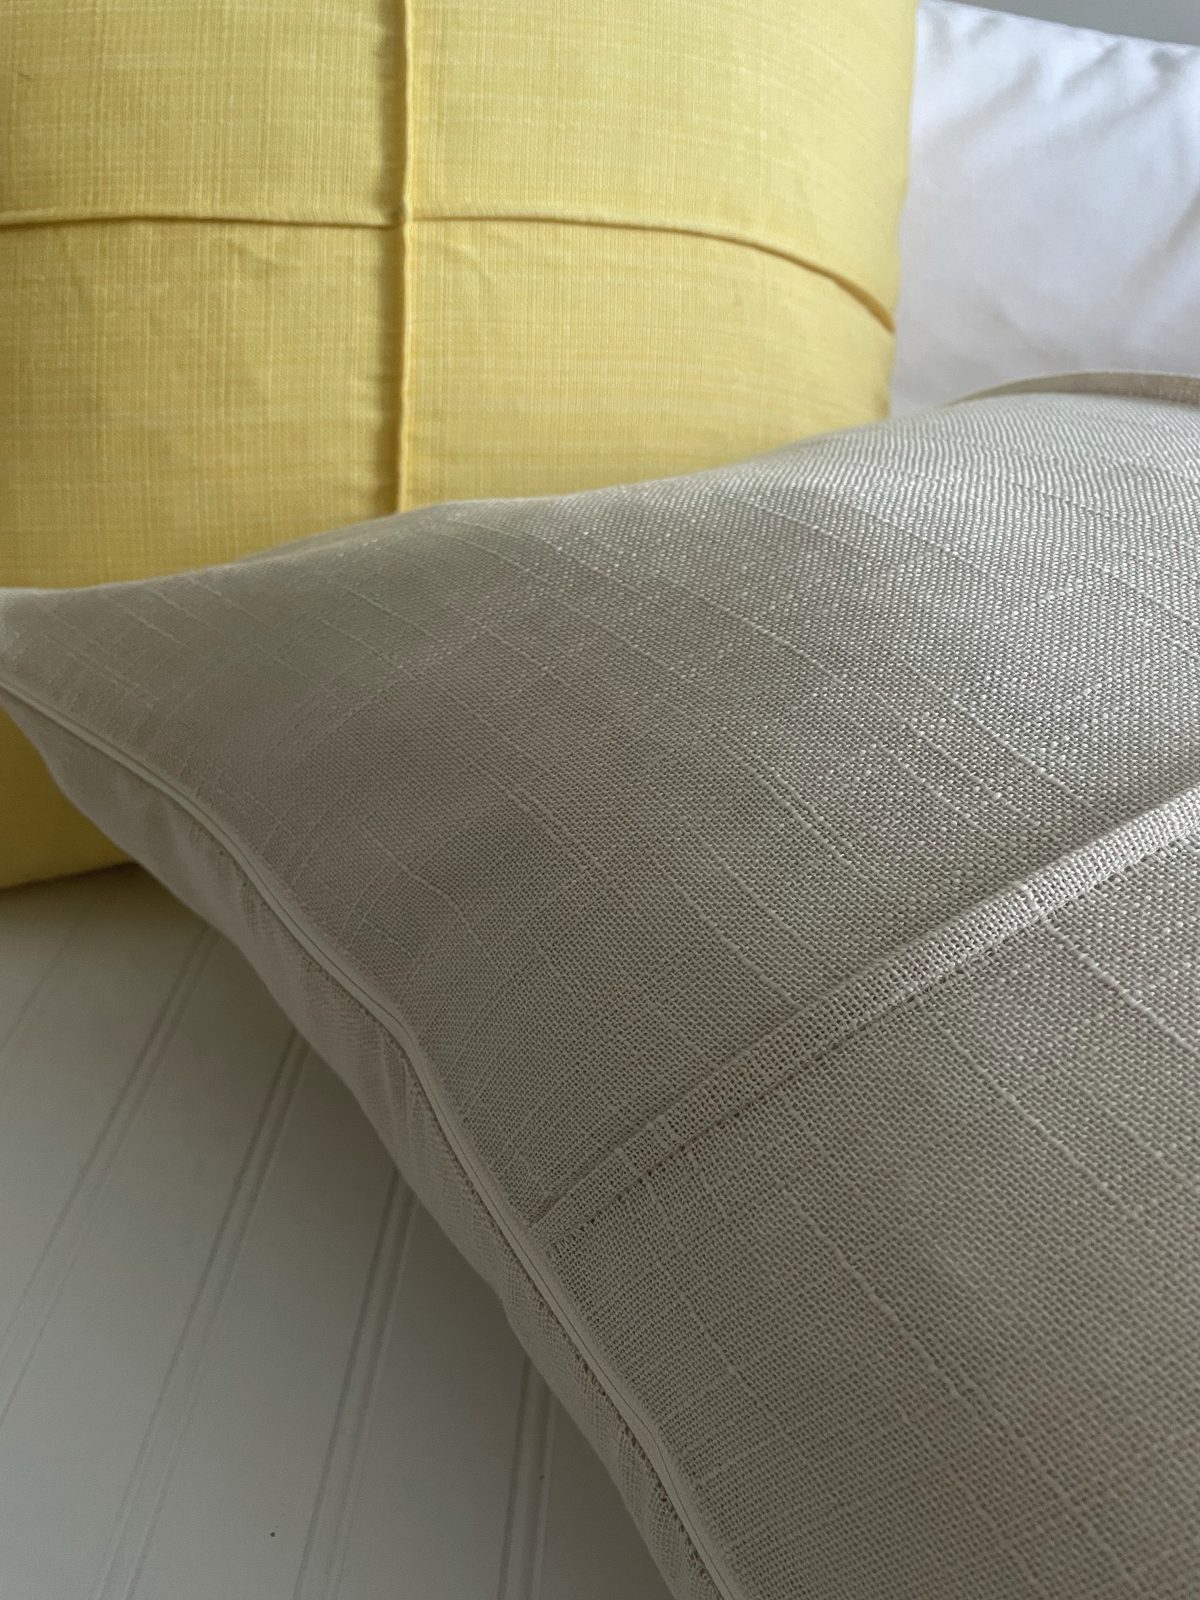 Sew Classic Pillow Covers with a Twist Tutorial: Before and After